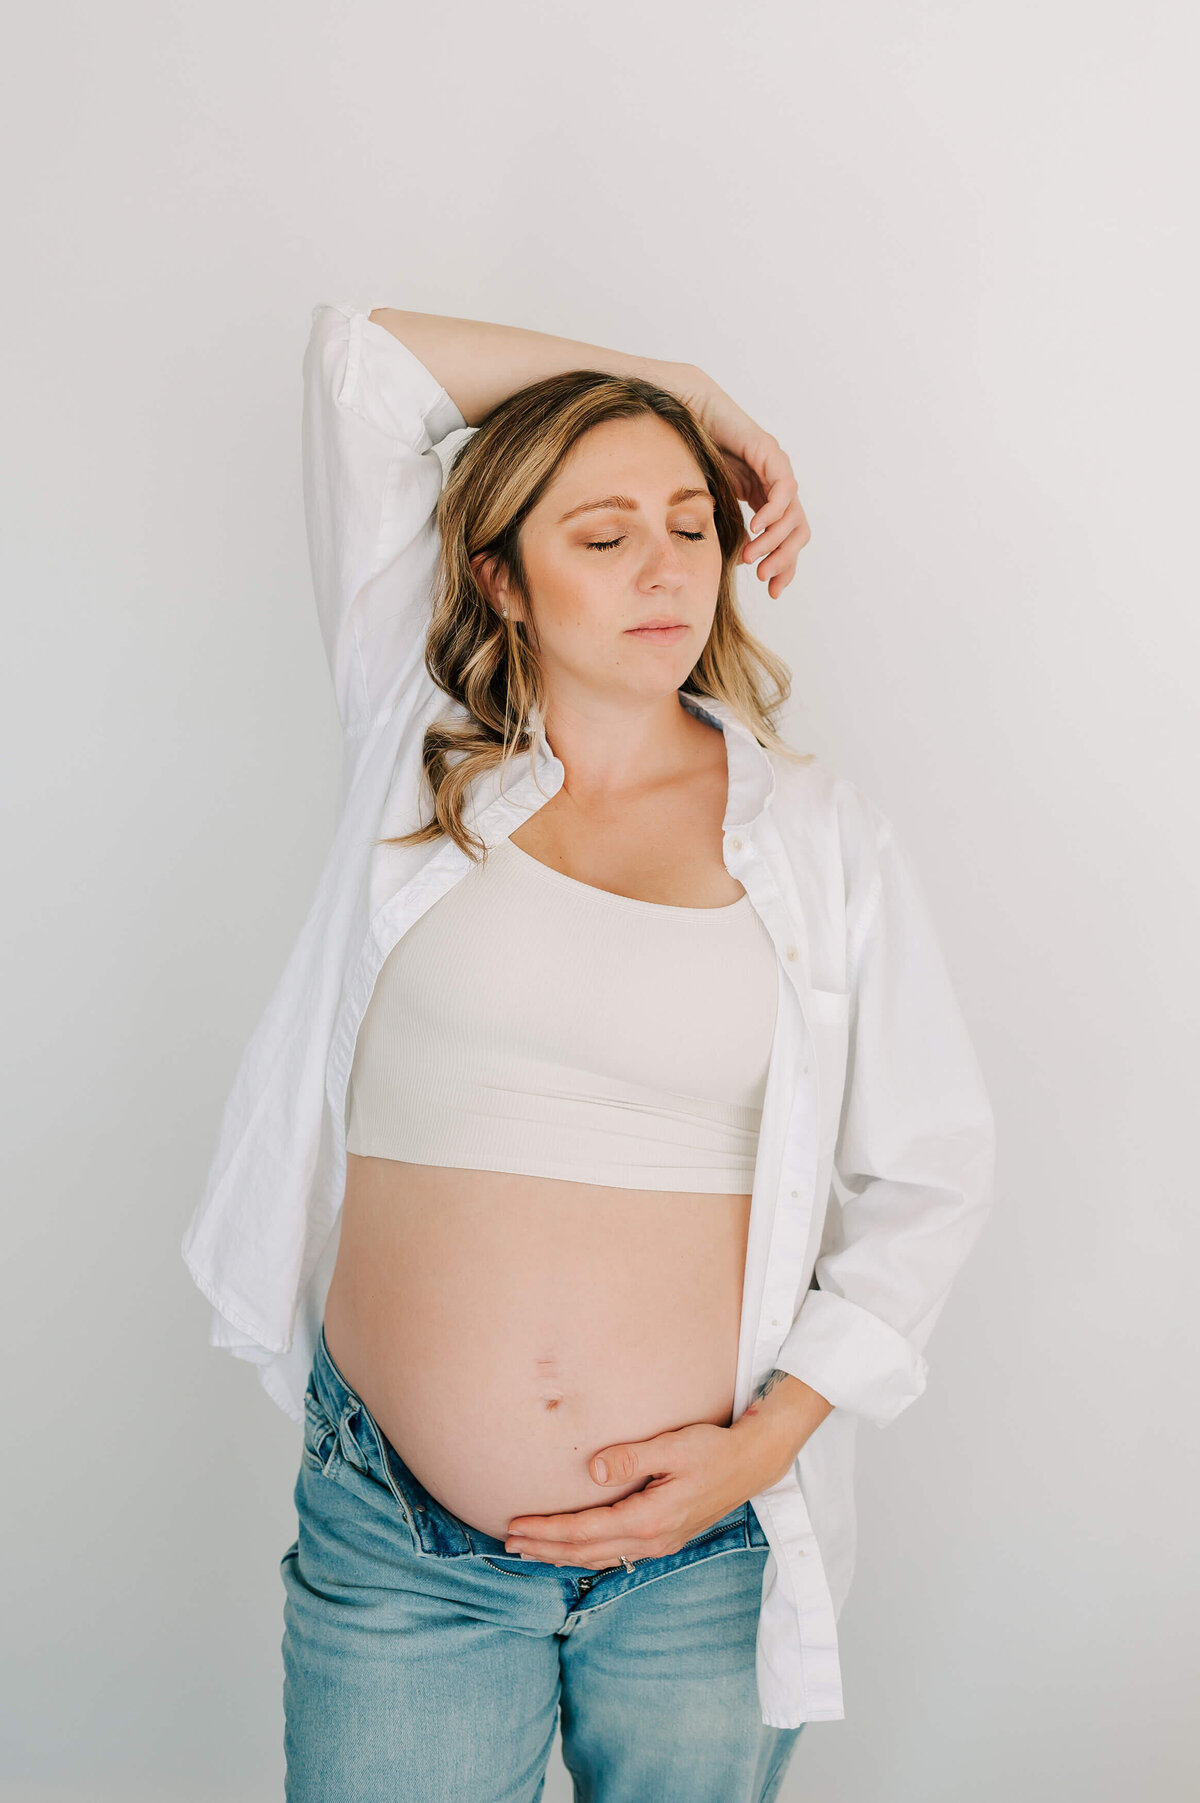 pregnant mom in jeans holding baby bump during studio maternity session in Springfield MO